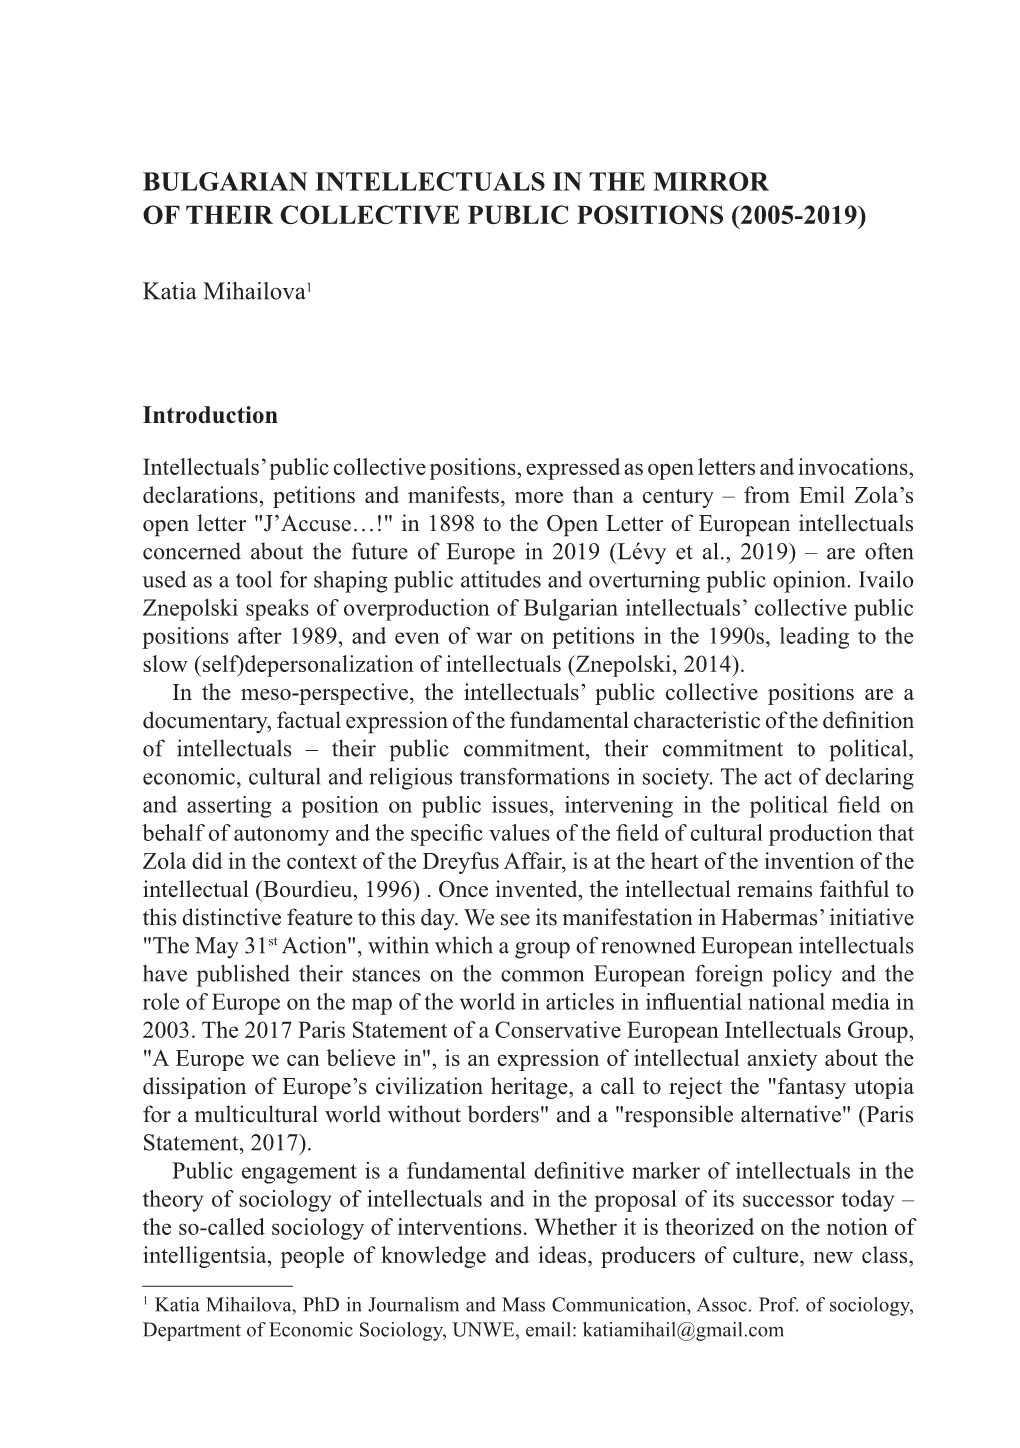 Bulgarian Intellectuals in the Mirror of Their Collective Public Positions (2005-2019)